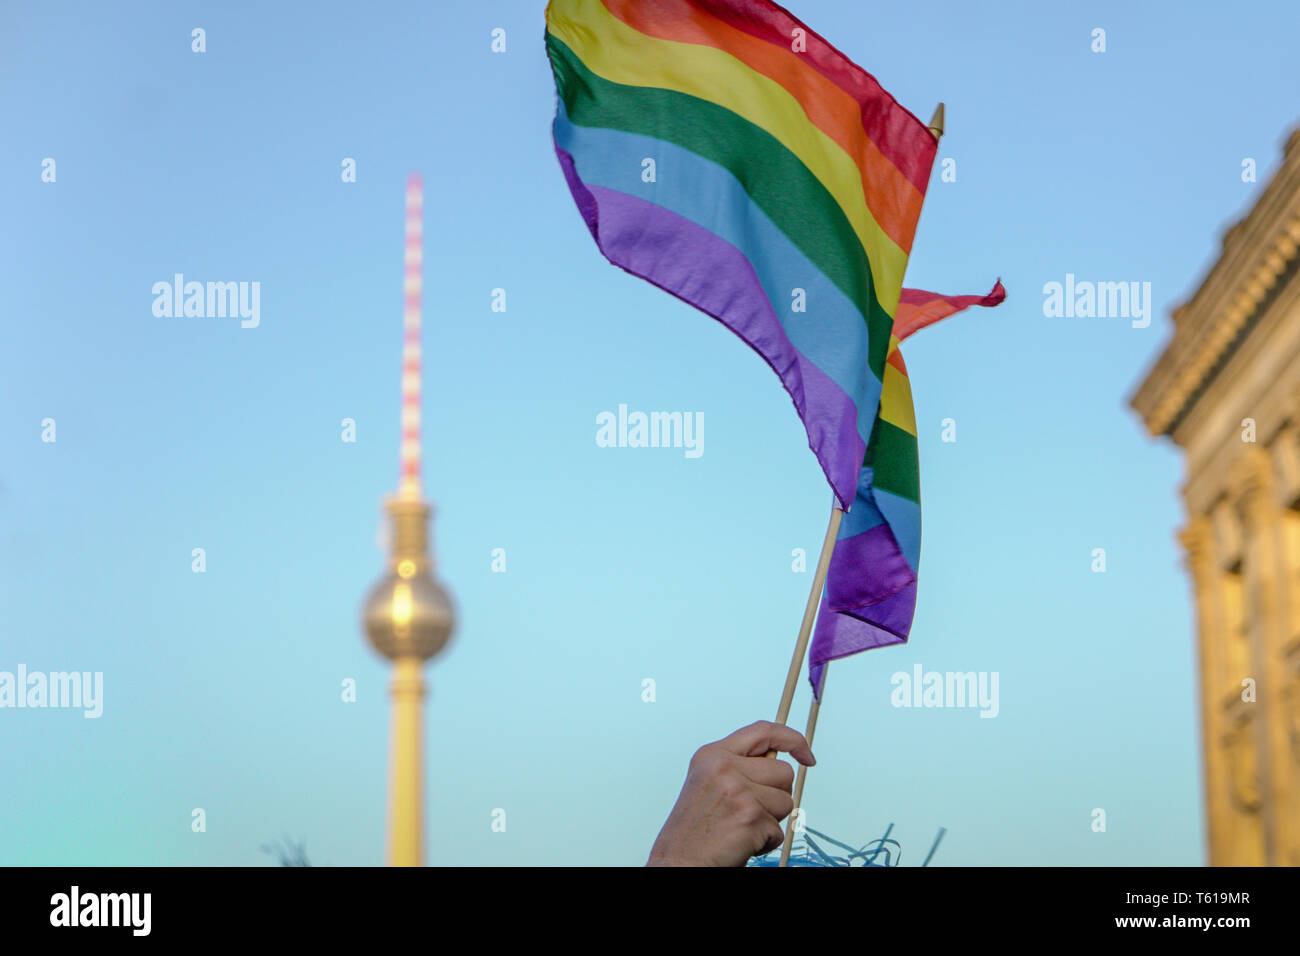 LOW ANGLE VIEW OF HAND HOLDING RAINBOW FLAG DURING CSD-PARADE IN BERLIN Stock Photo